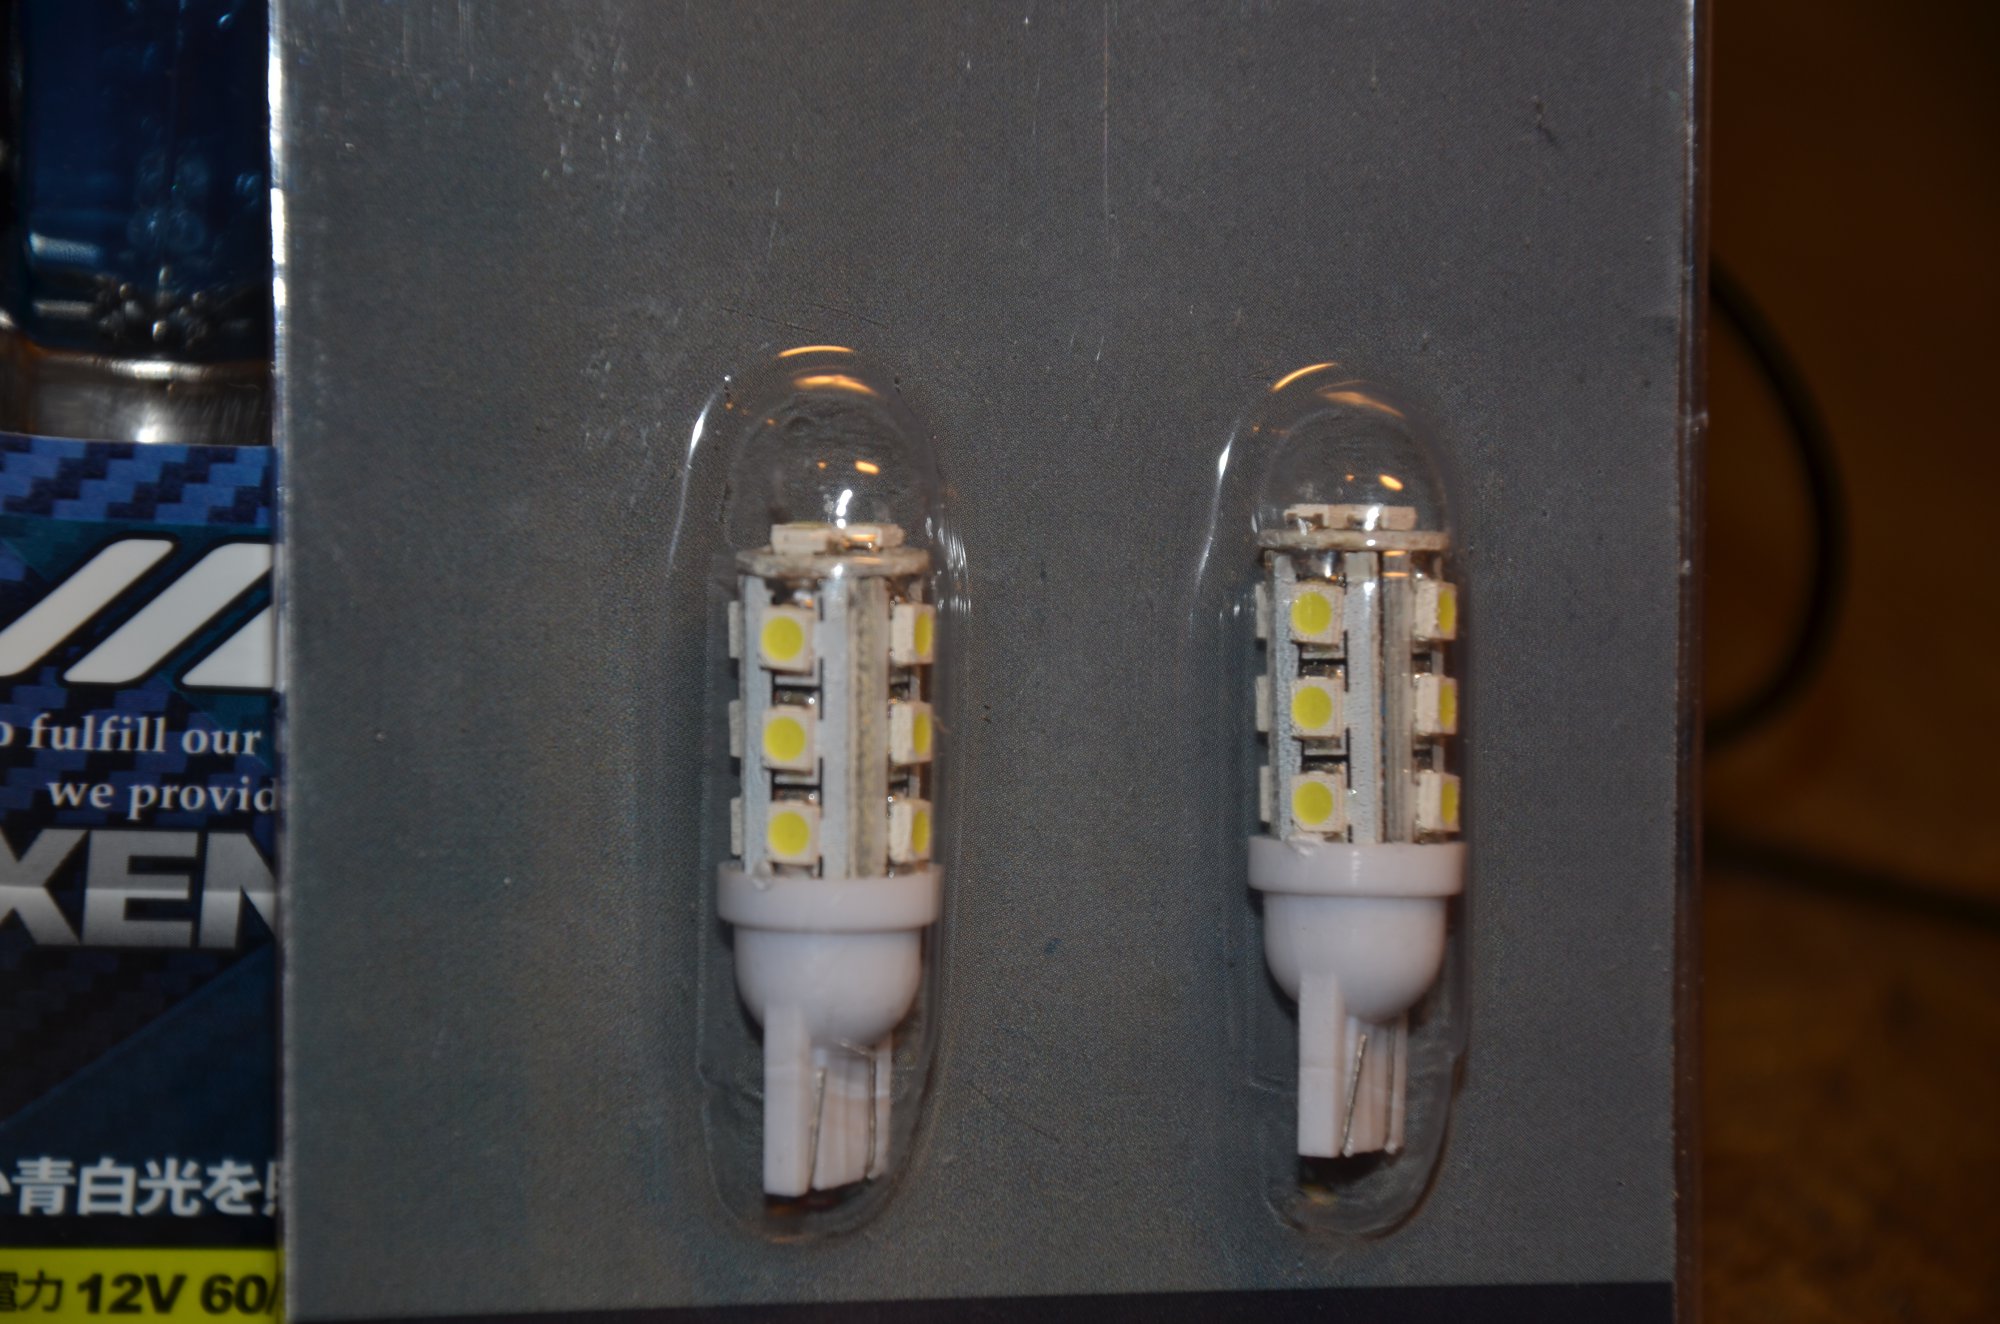 Lamps SMD-2.JPG